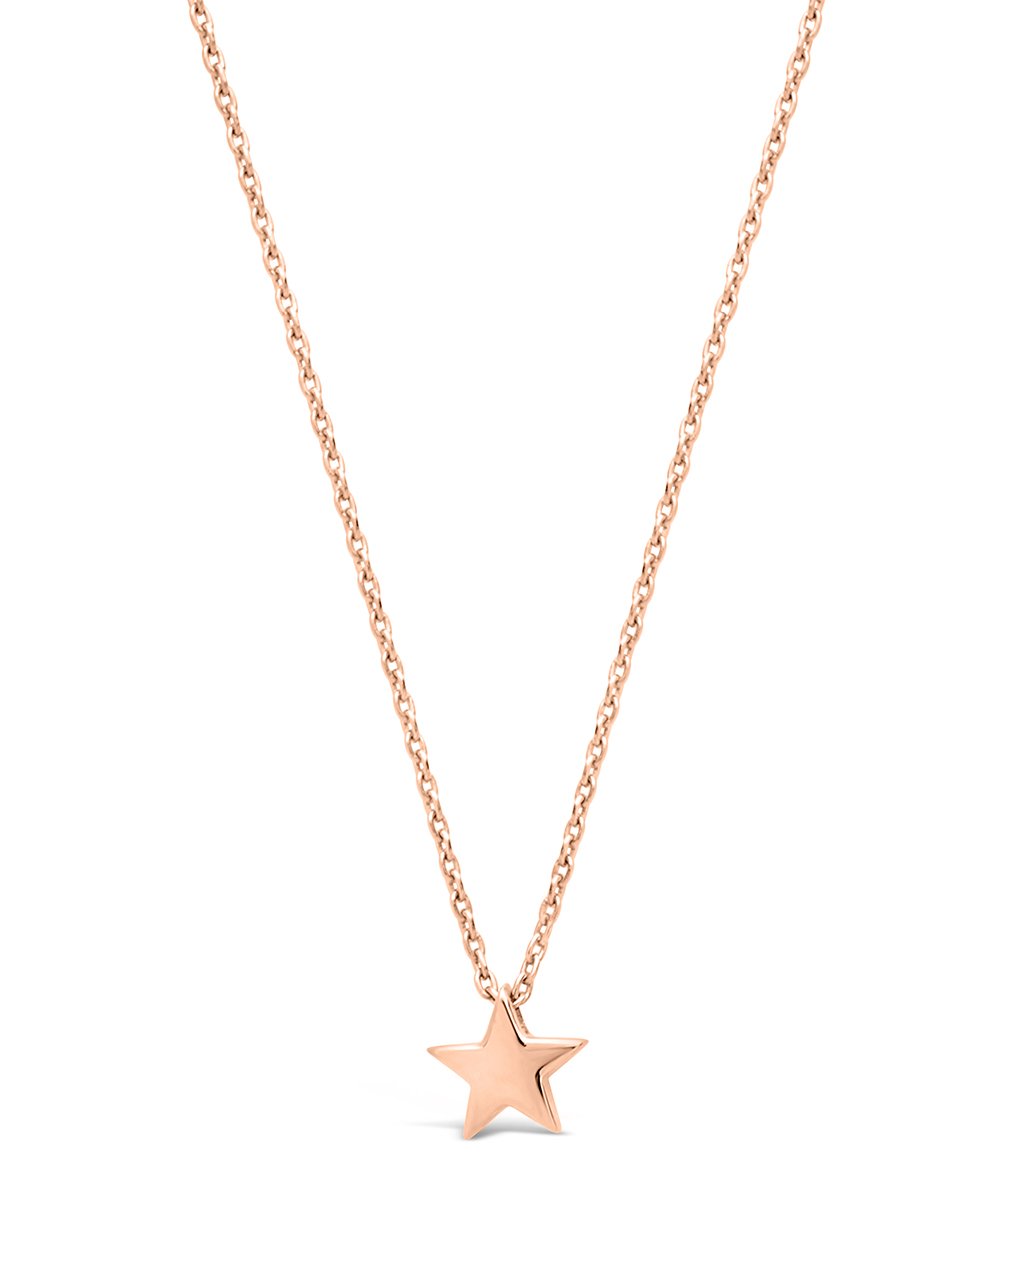 Sterling Silver Delicate Star Pendant Necklace - Sterling Forever